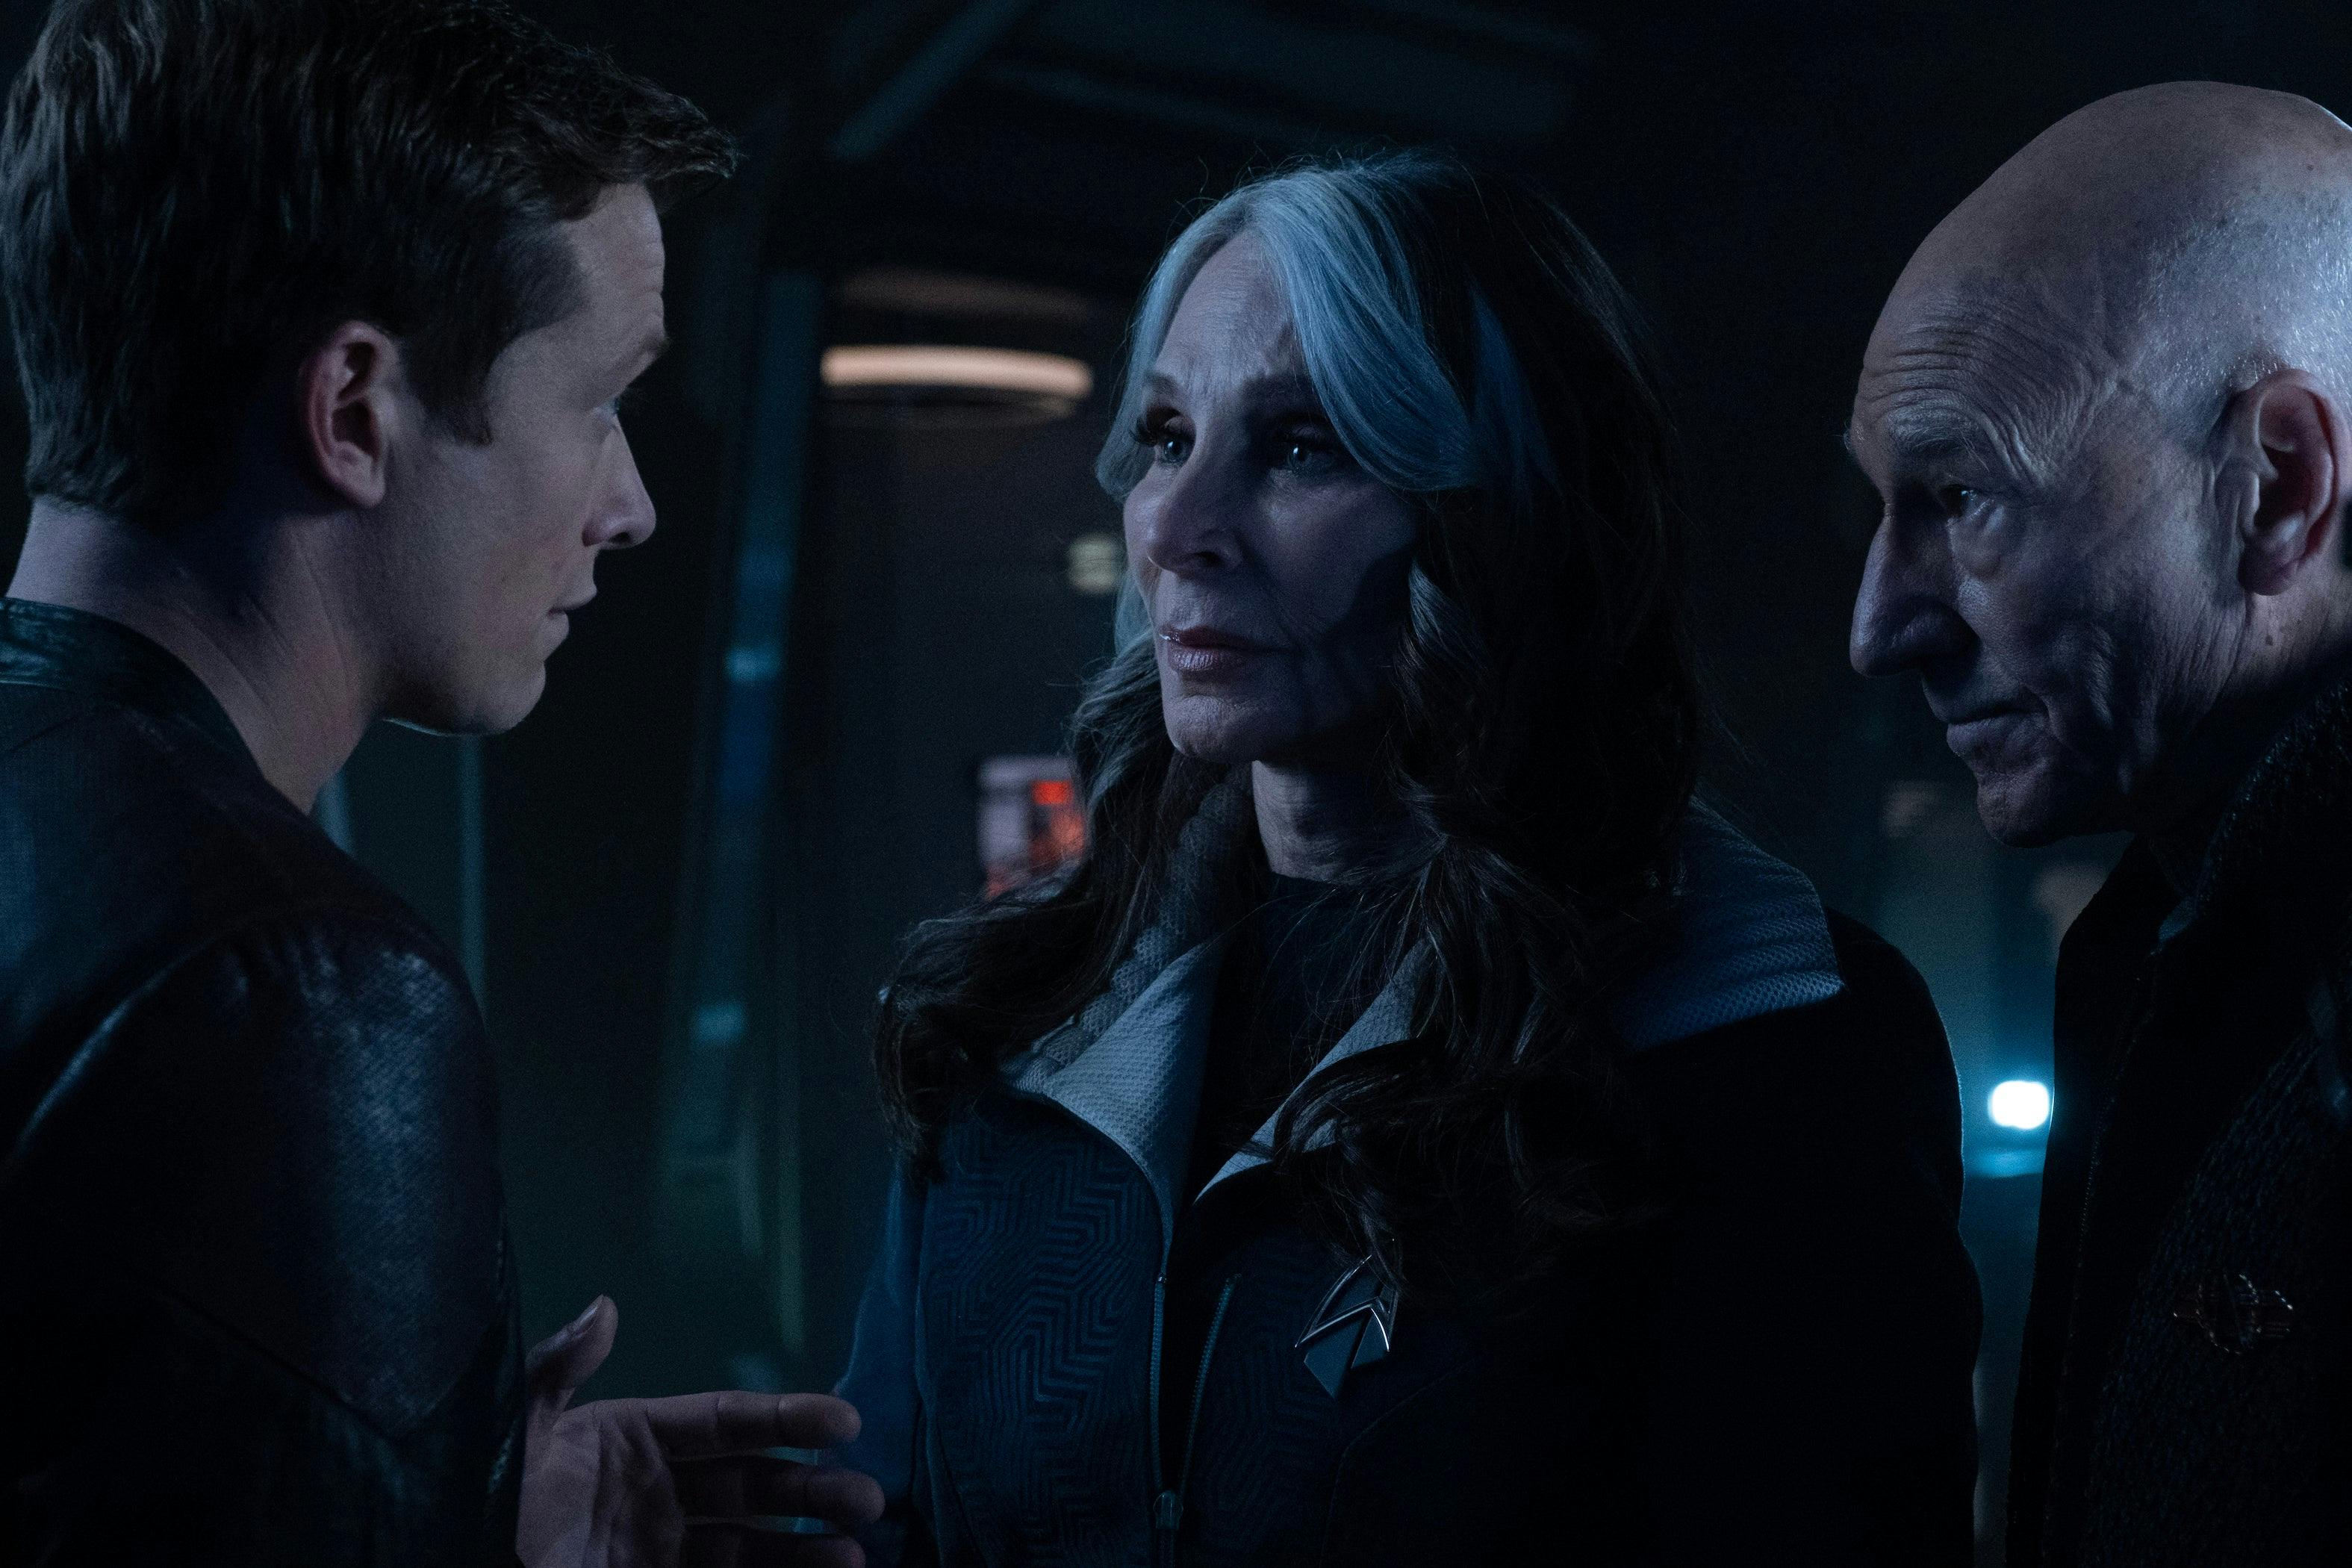 Jack Crusher faces his parents Beverly Crusher and Jean-Luc Picard